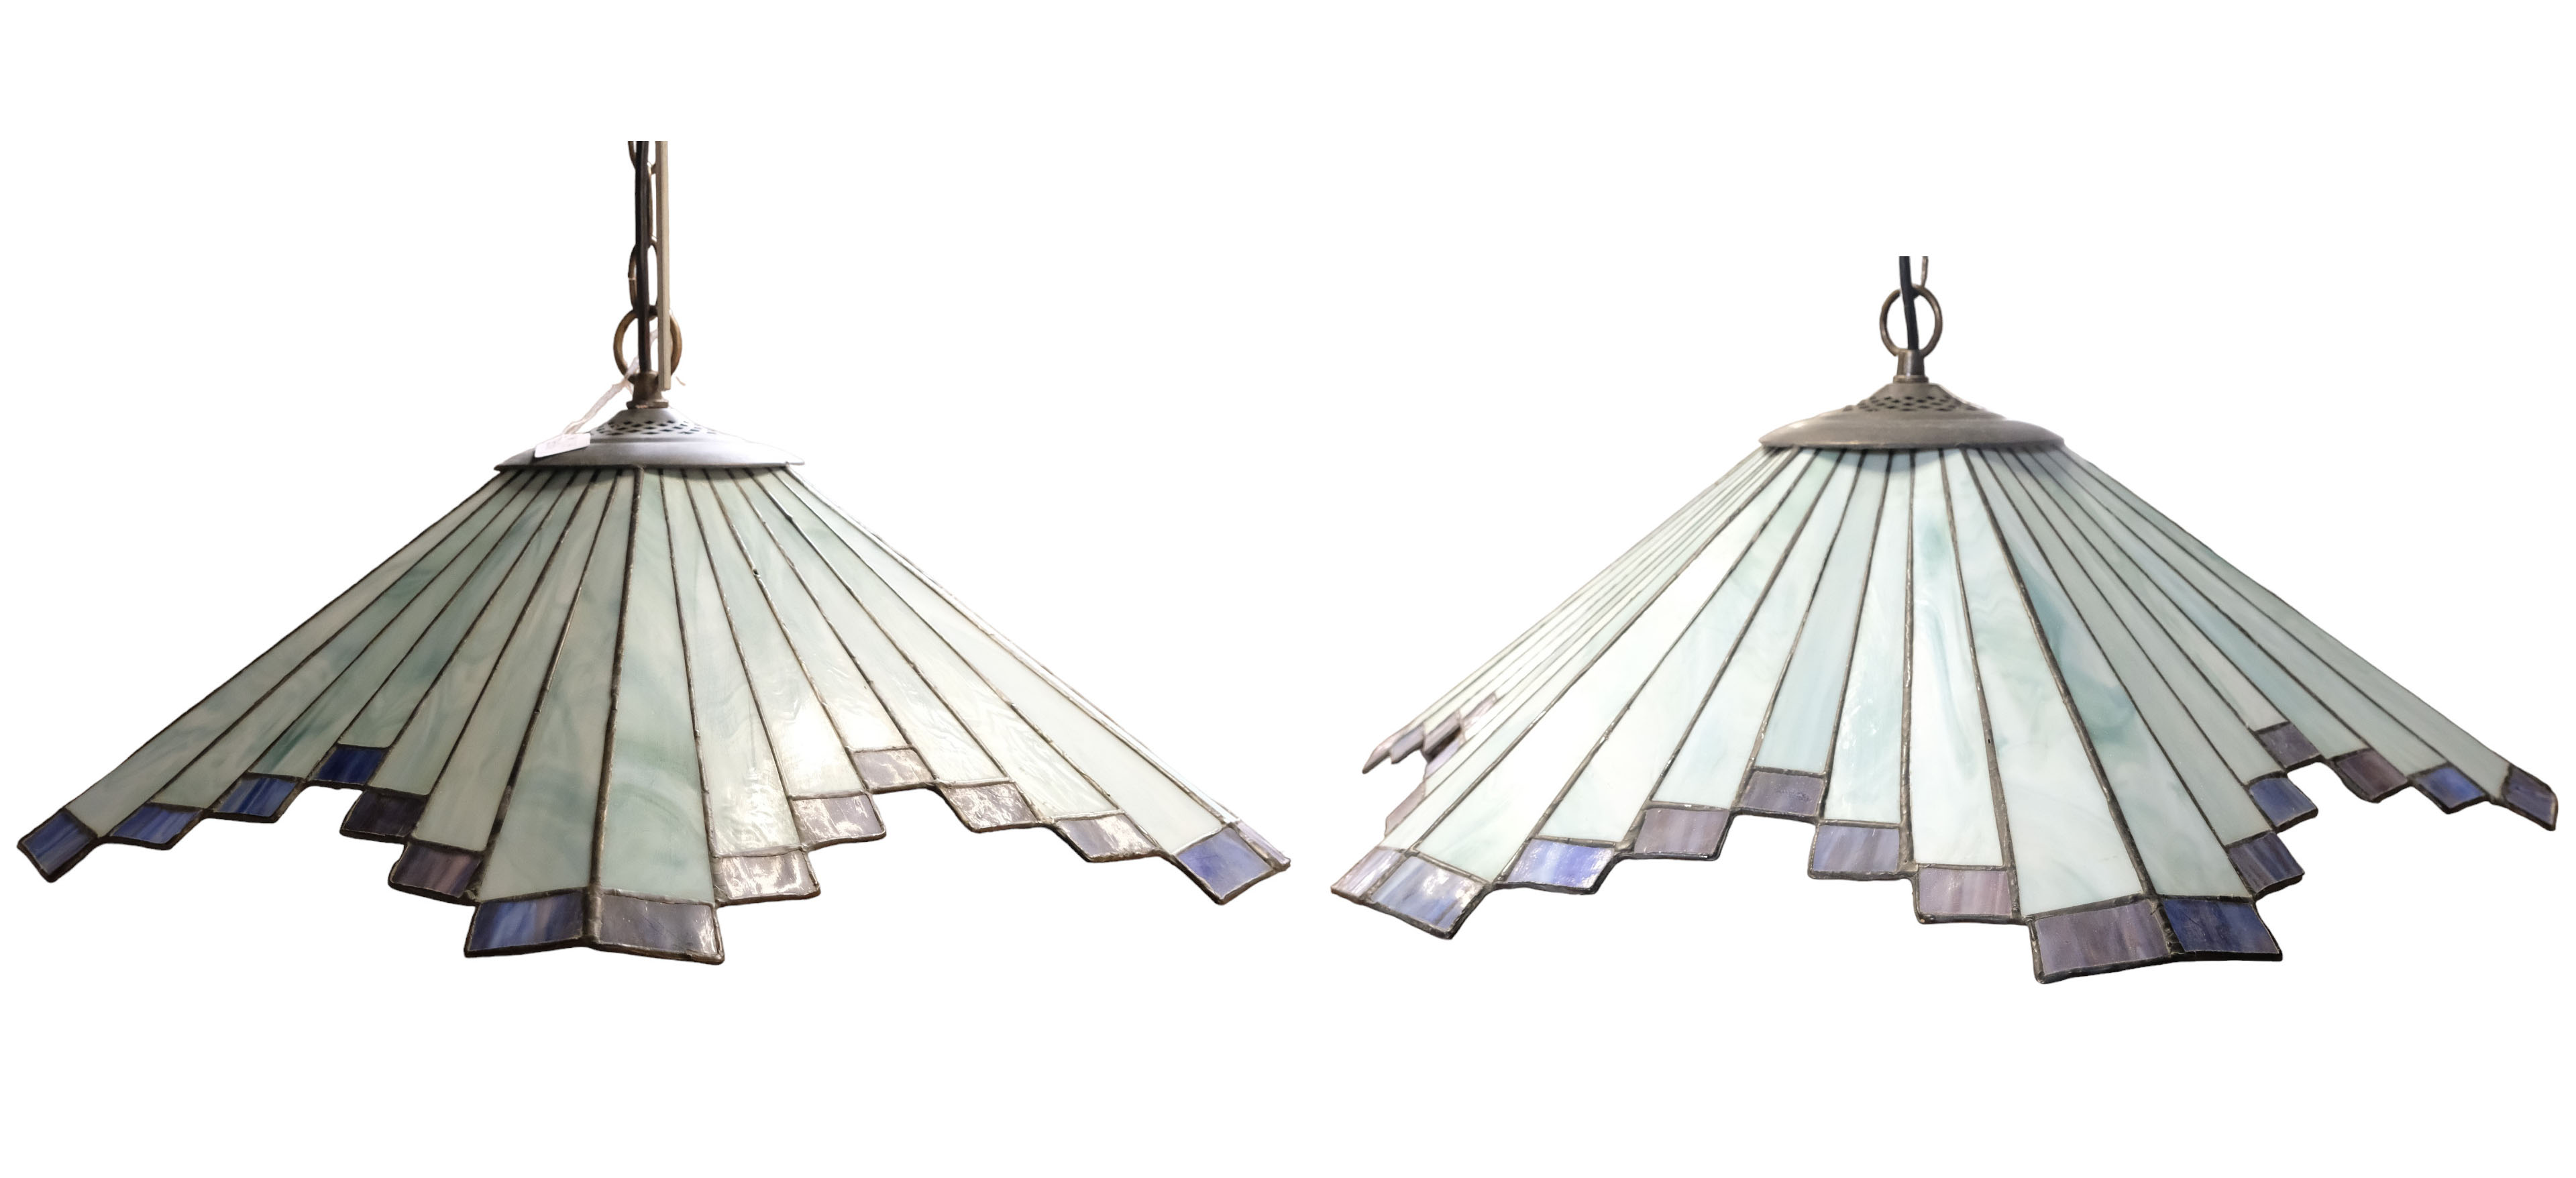 A pair of Tiffany-style lead glass pendant light fittings, 55.5 cm diameter